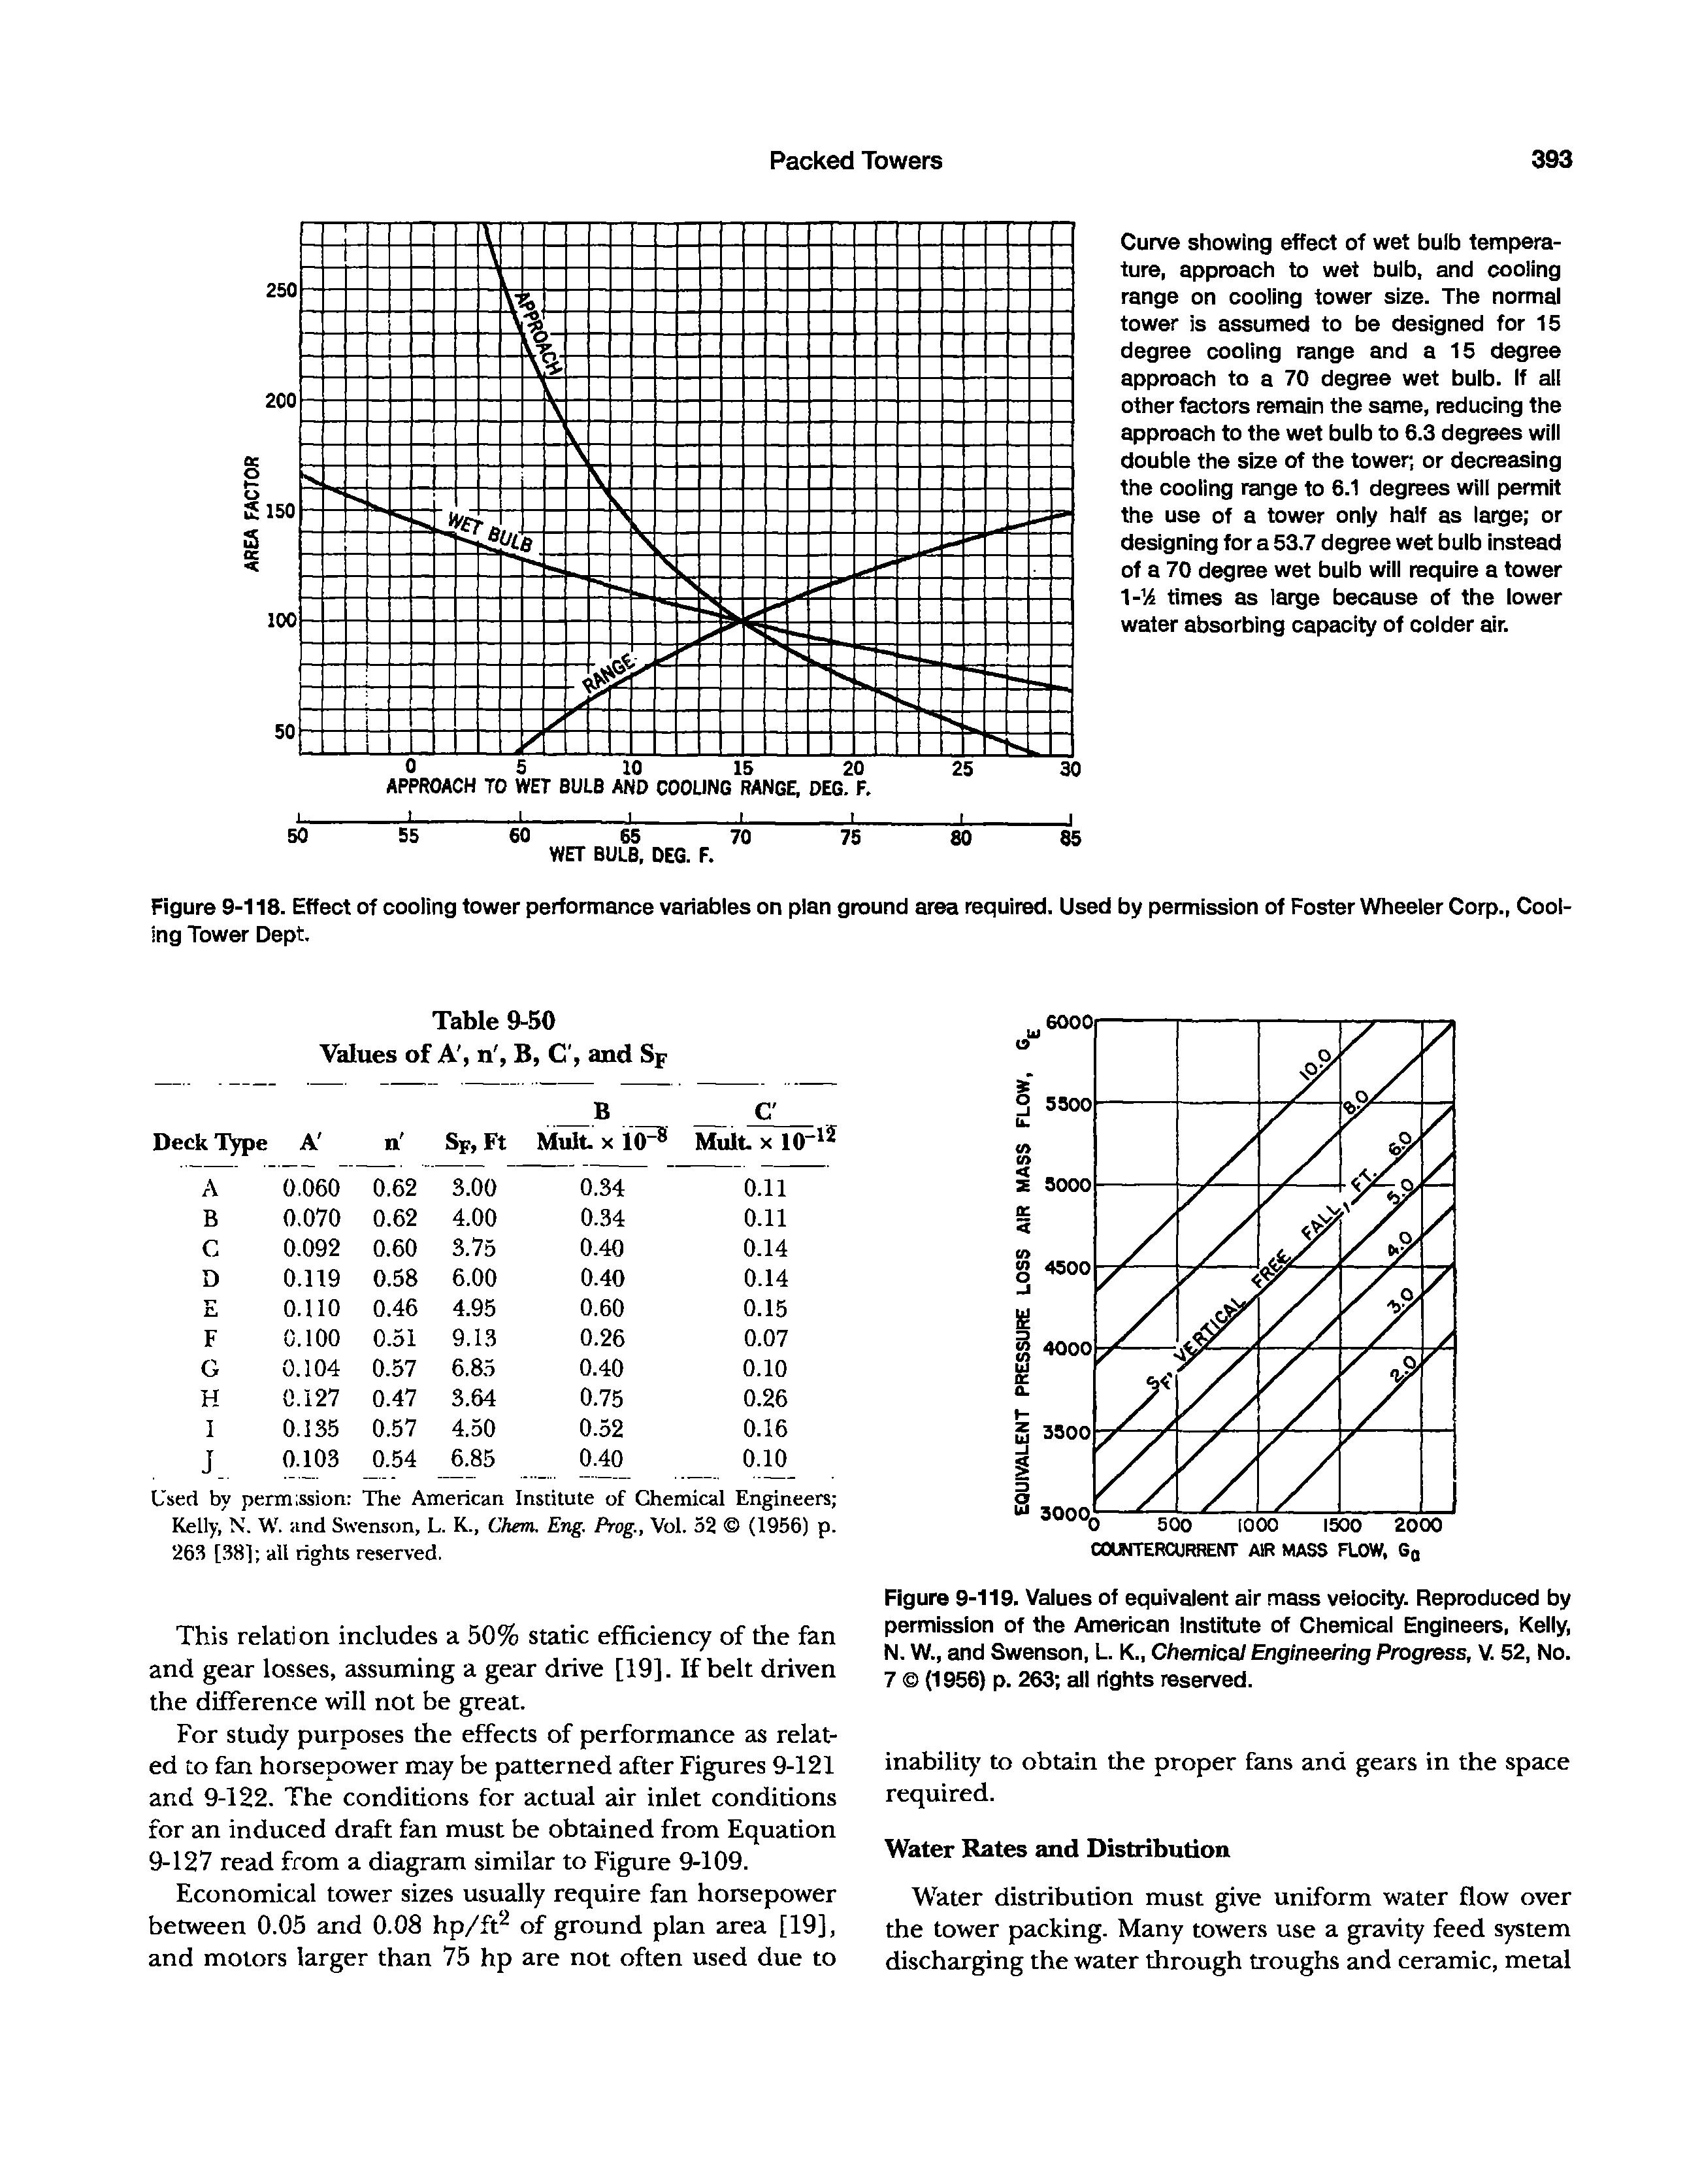 Figure 9-119. Values of equivalent air mass velocity. Reproduced by permission of the American Institute of Chemical Engineers, Kelly, N. W., and Swenson, L. K., Chemical Engineering Progress, V. 52, No. 7 (1956) p. 263 8tll rights reserved.